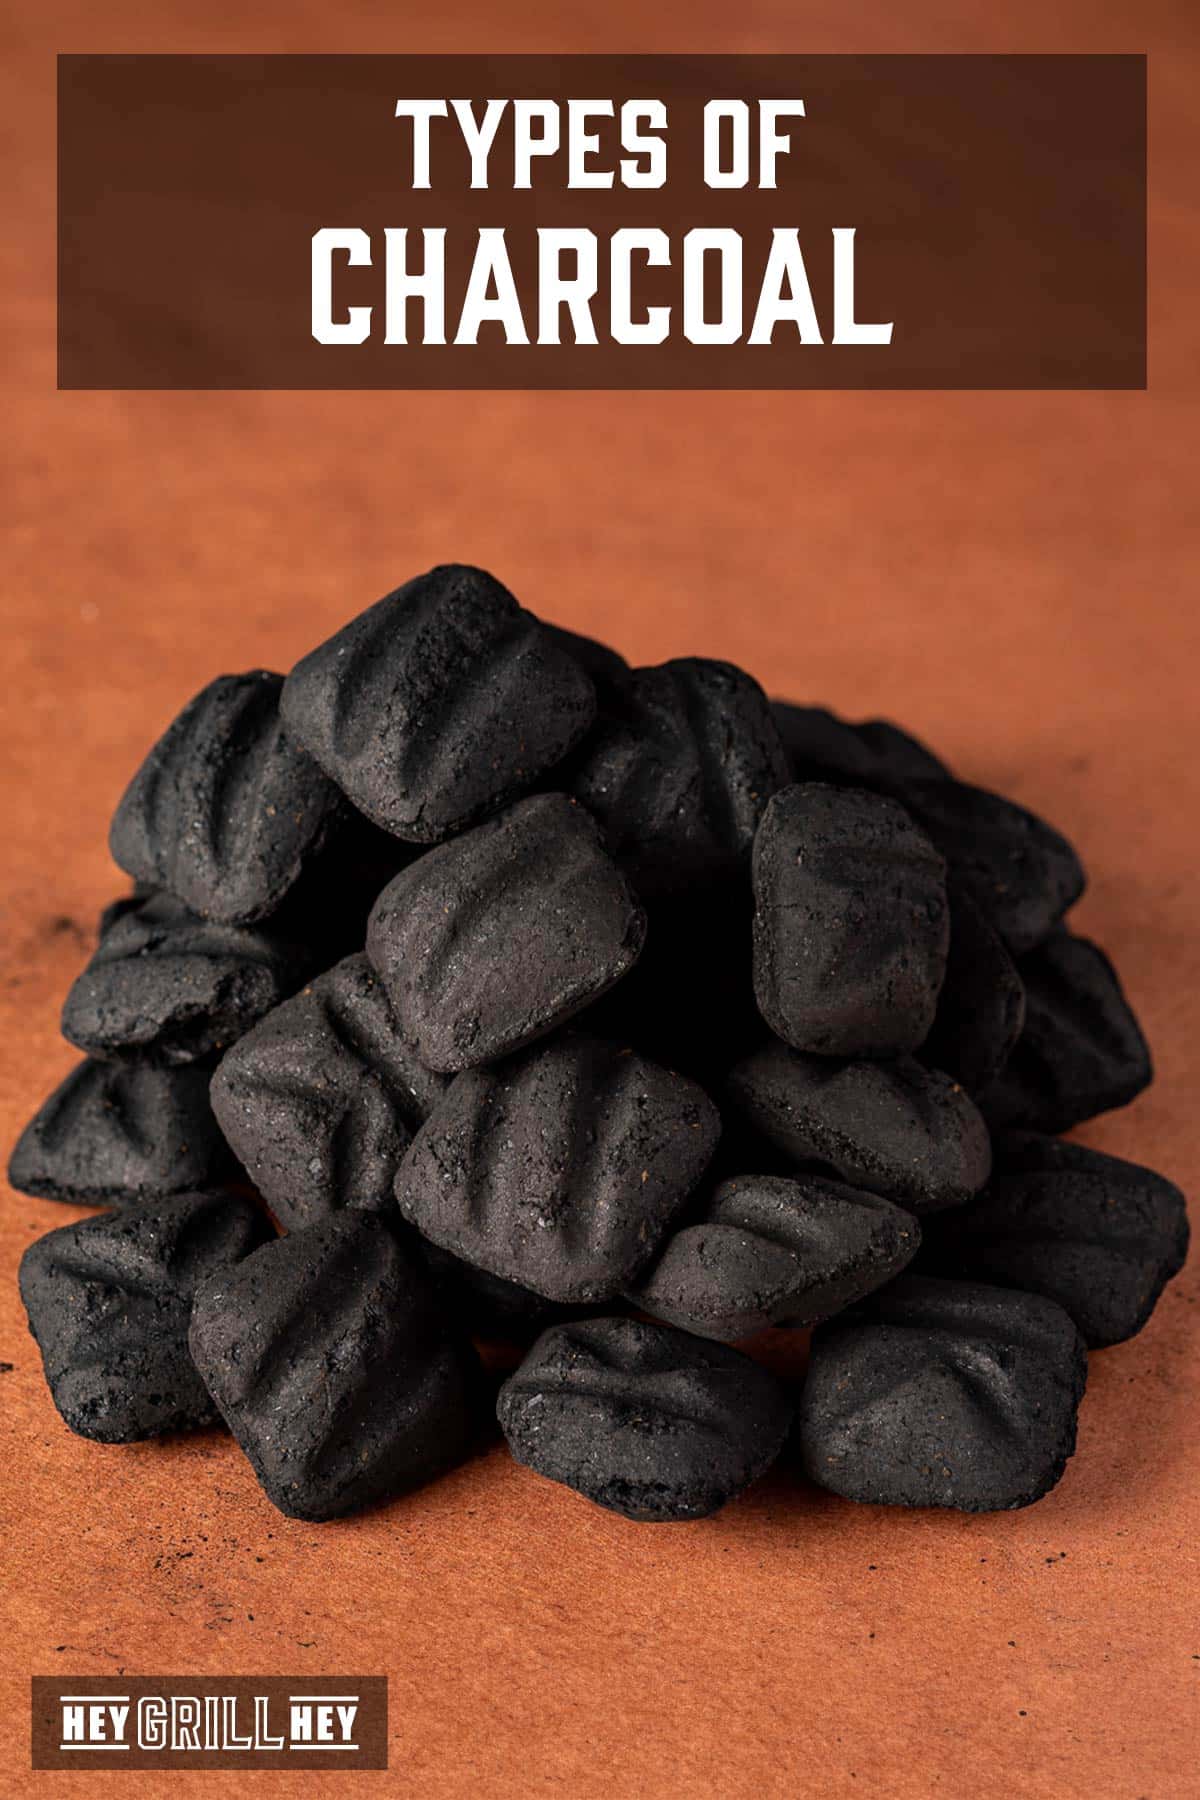 Stack of briquettes on butcher paper. Text reads "Types of Charcoal".